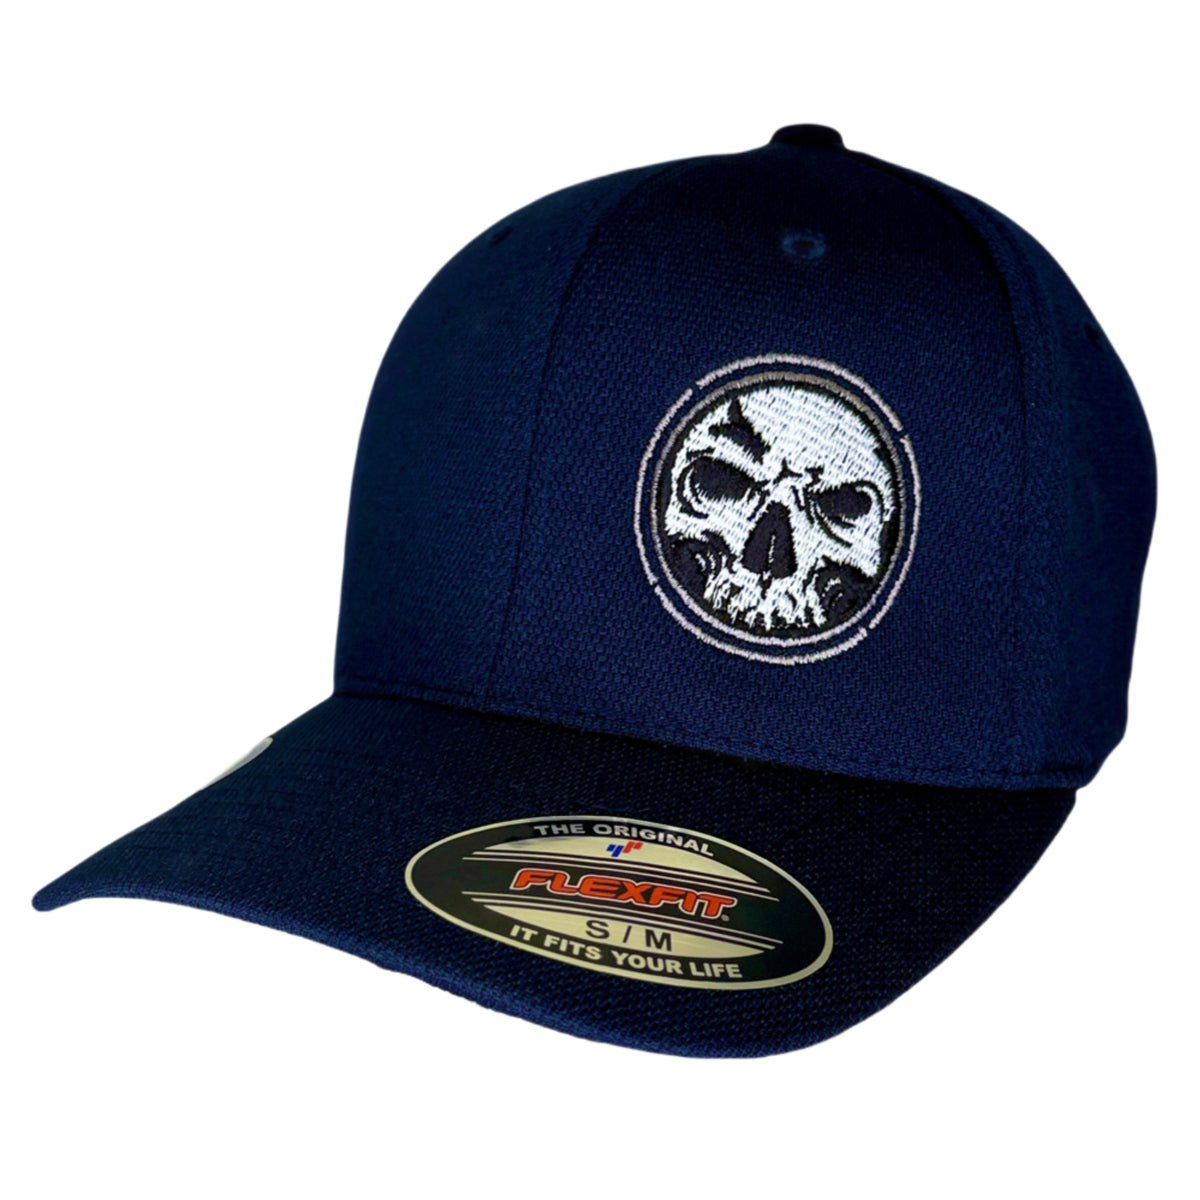 CLOSEOUT - Flexfit "Never Fade" Navy Blue Hat - White Skull